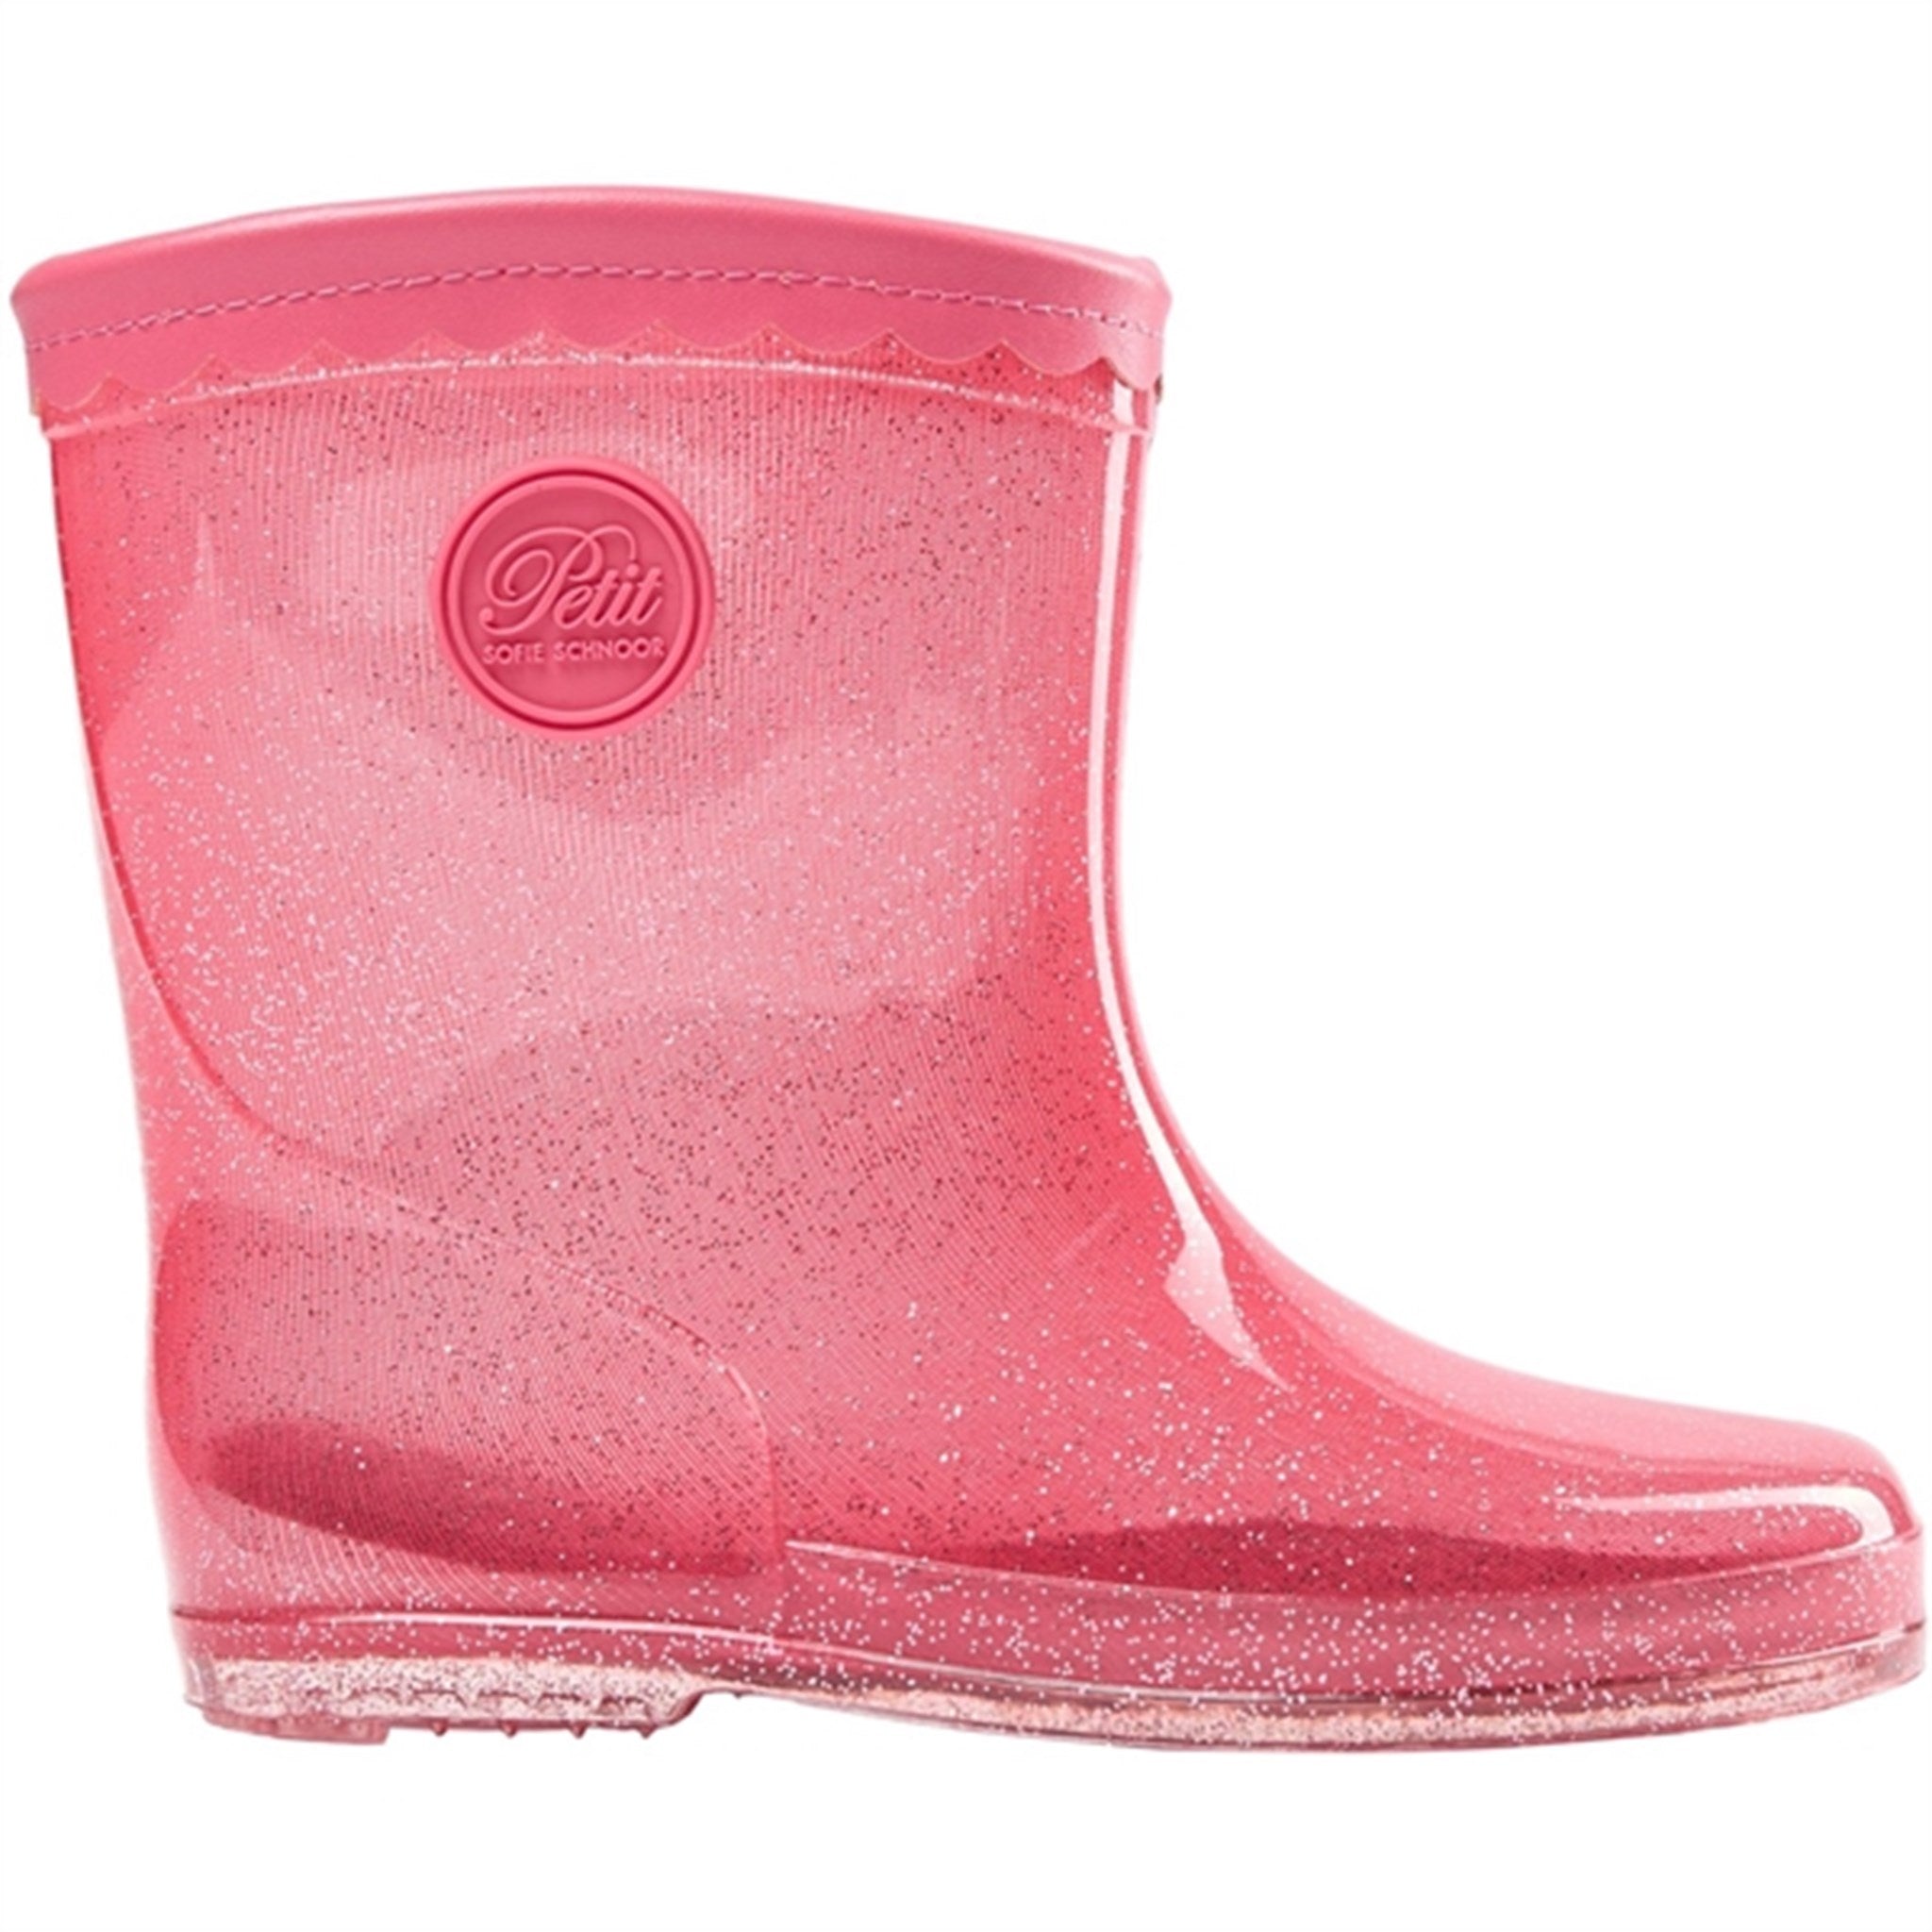 Sofie Schnoor Rubber Boots Coral Pink